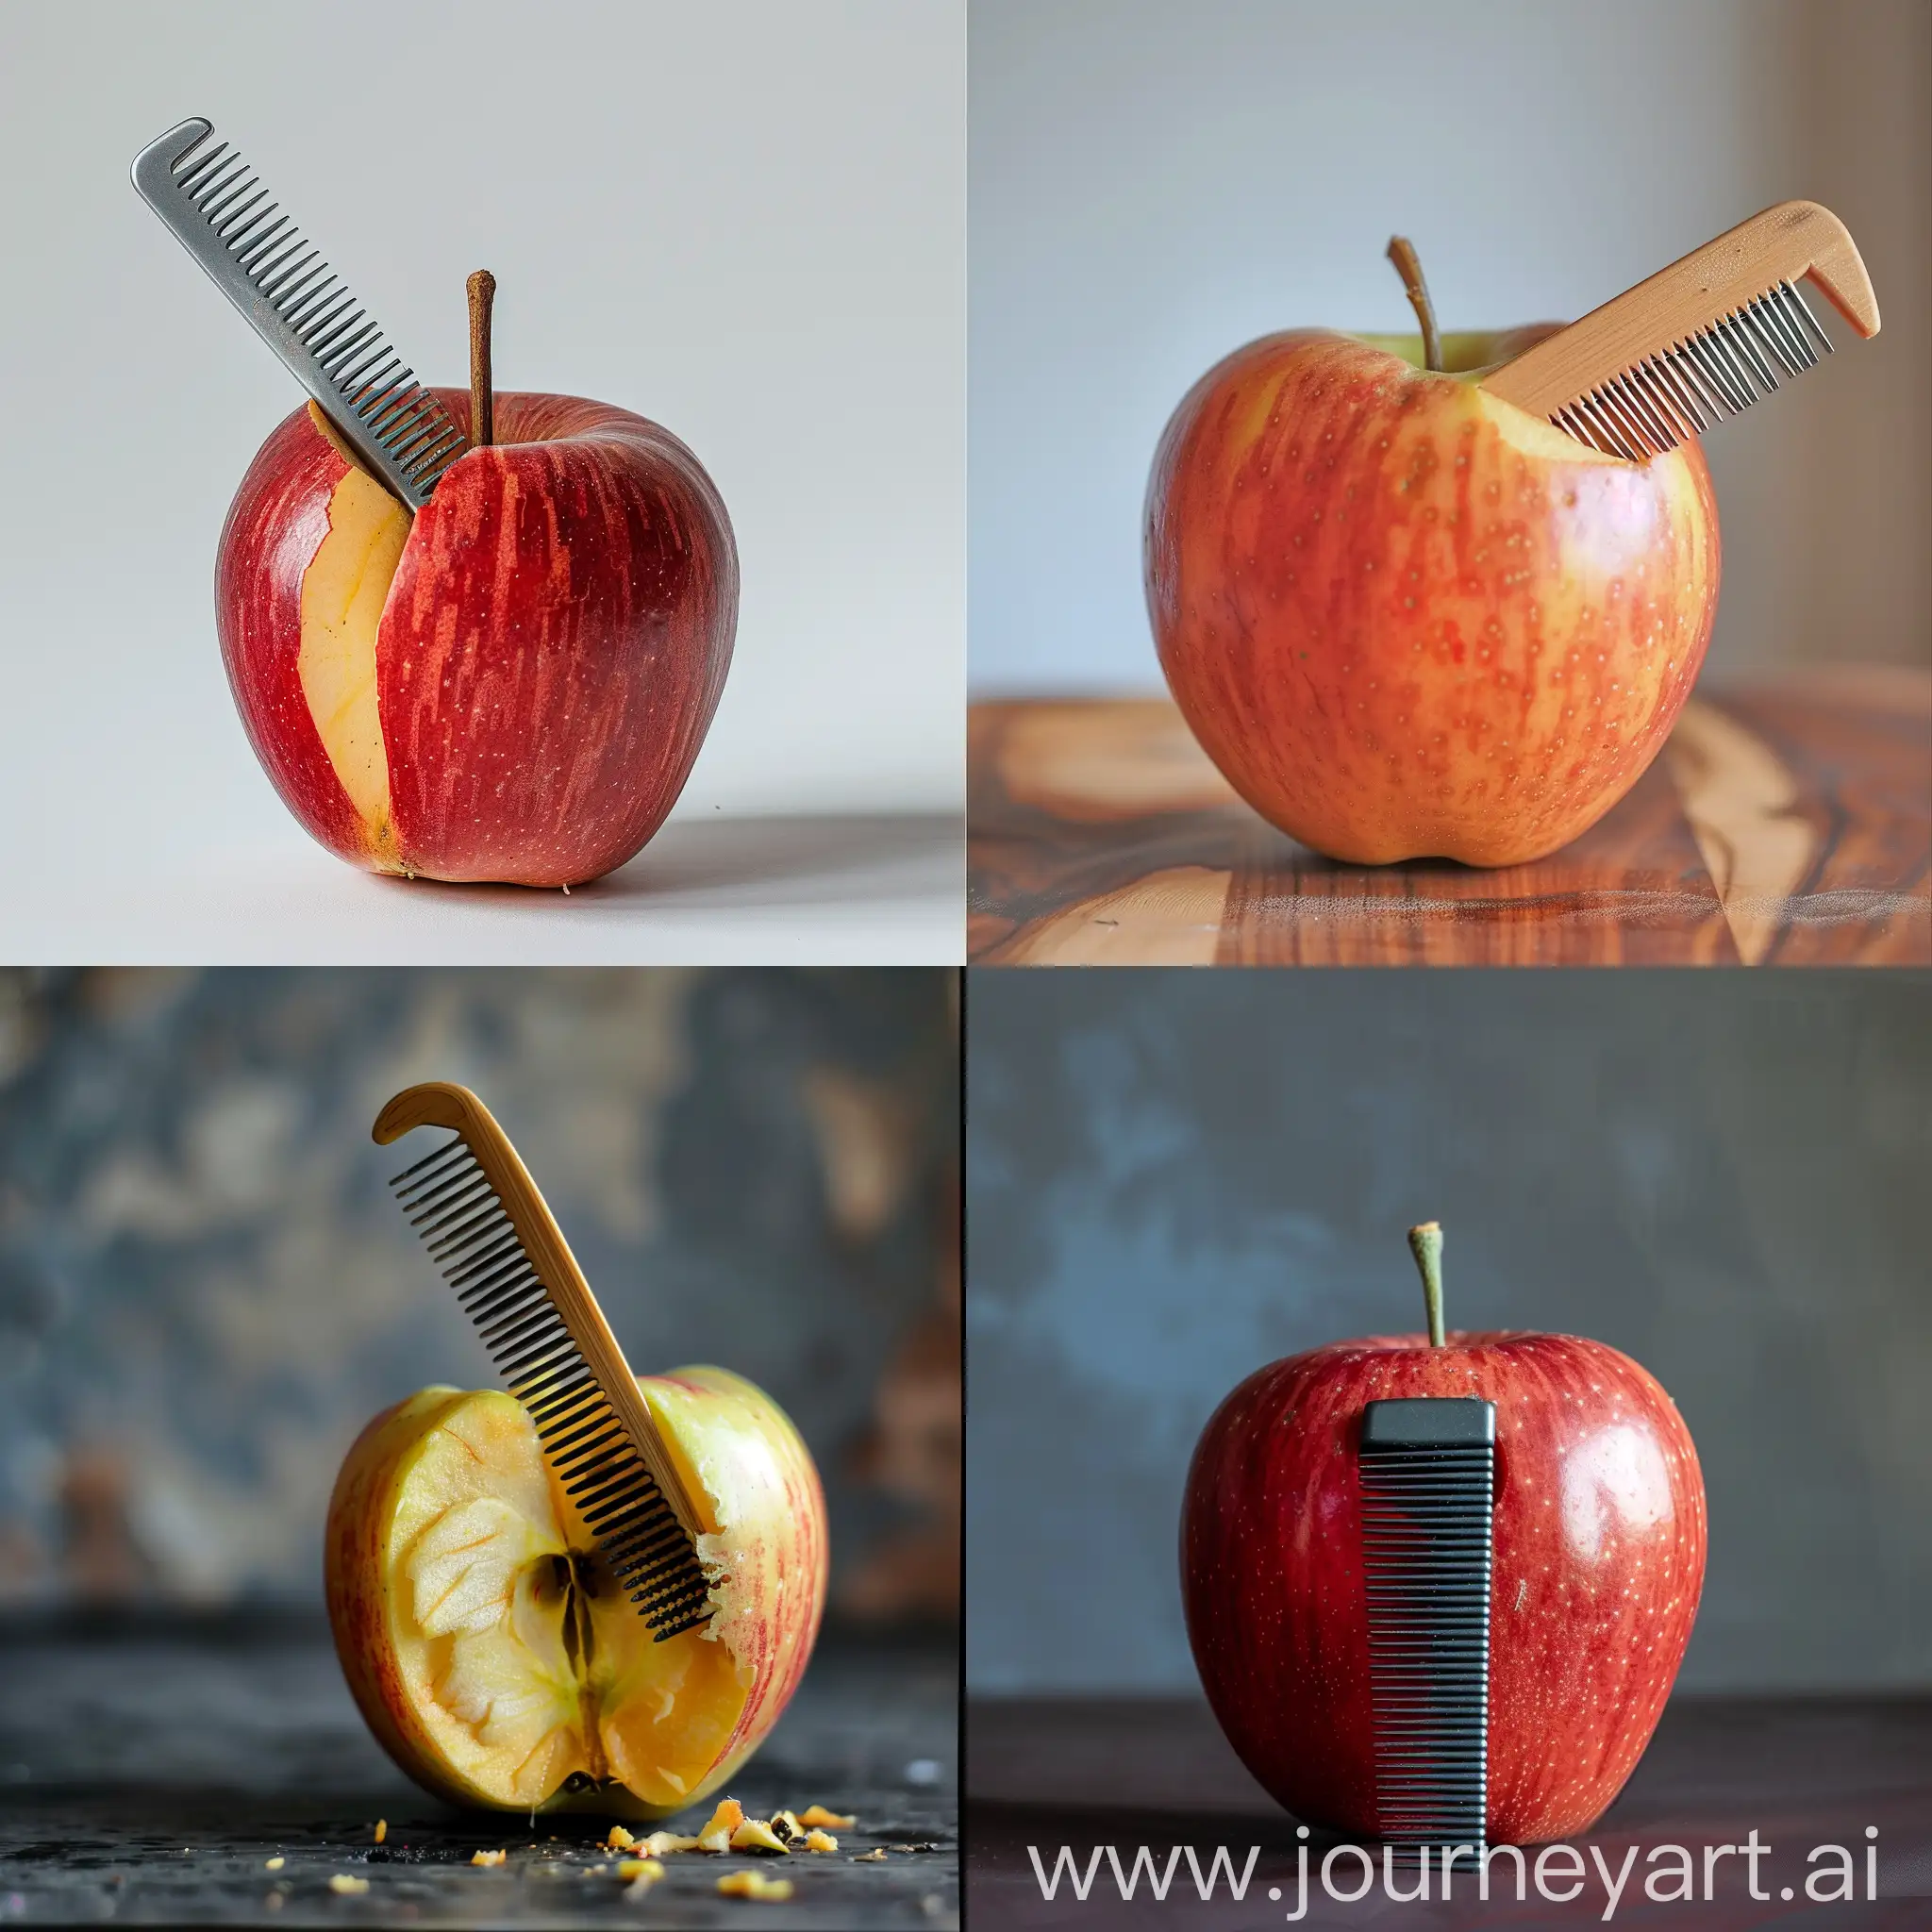 a comb stuck in an apple